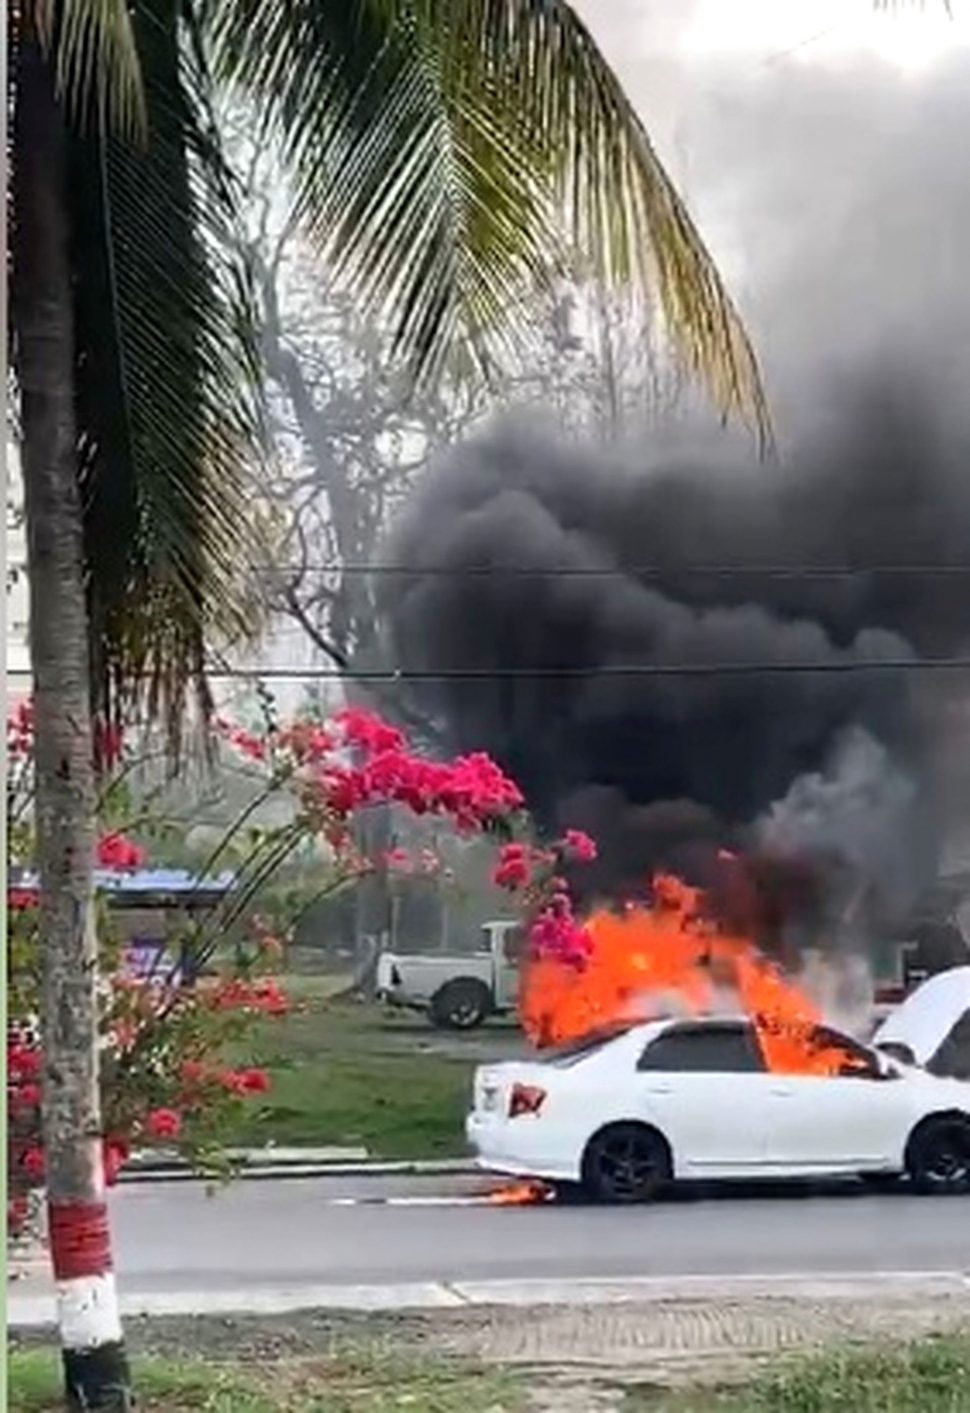 A White Axio sedan on fire in Gasparillo in early March.